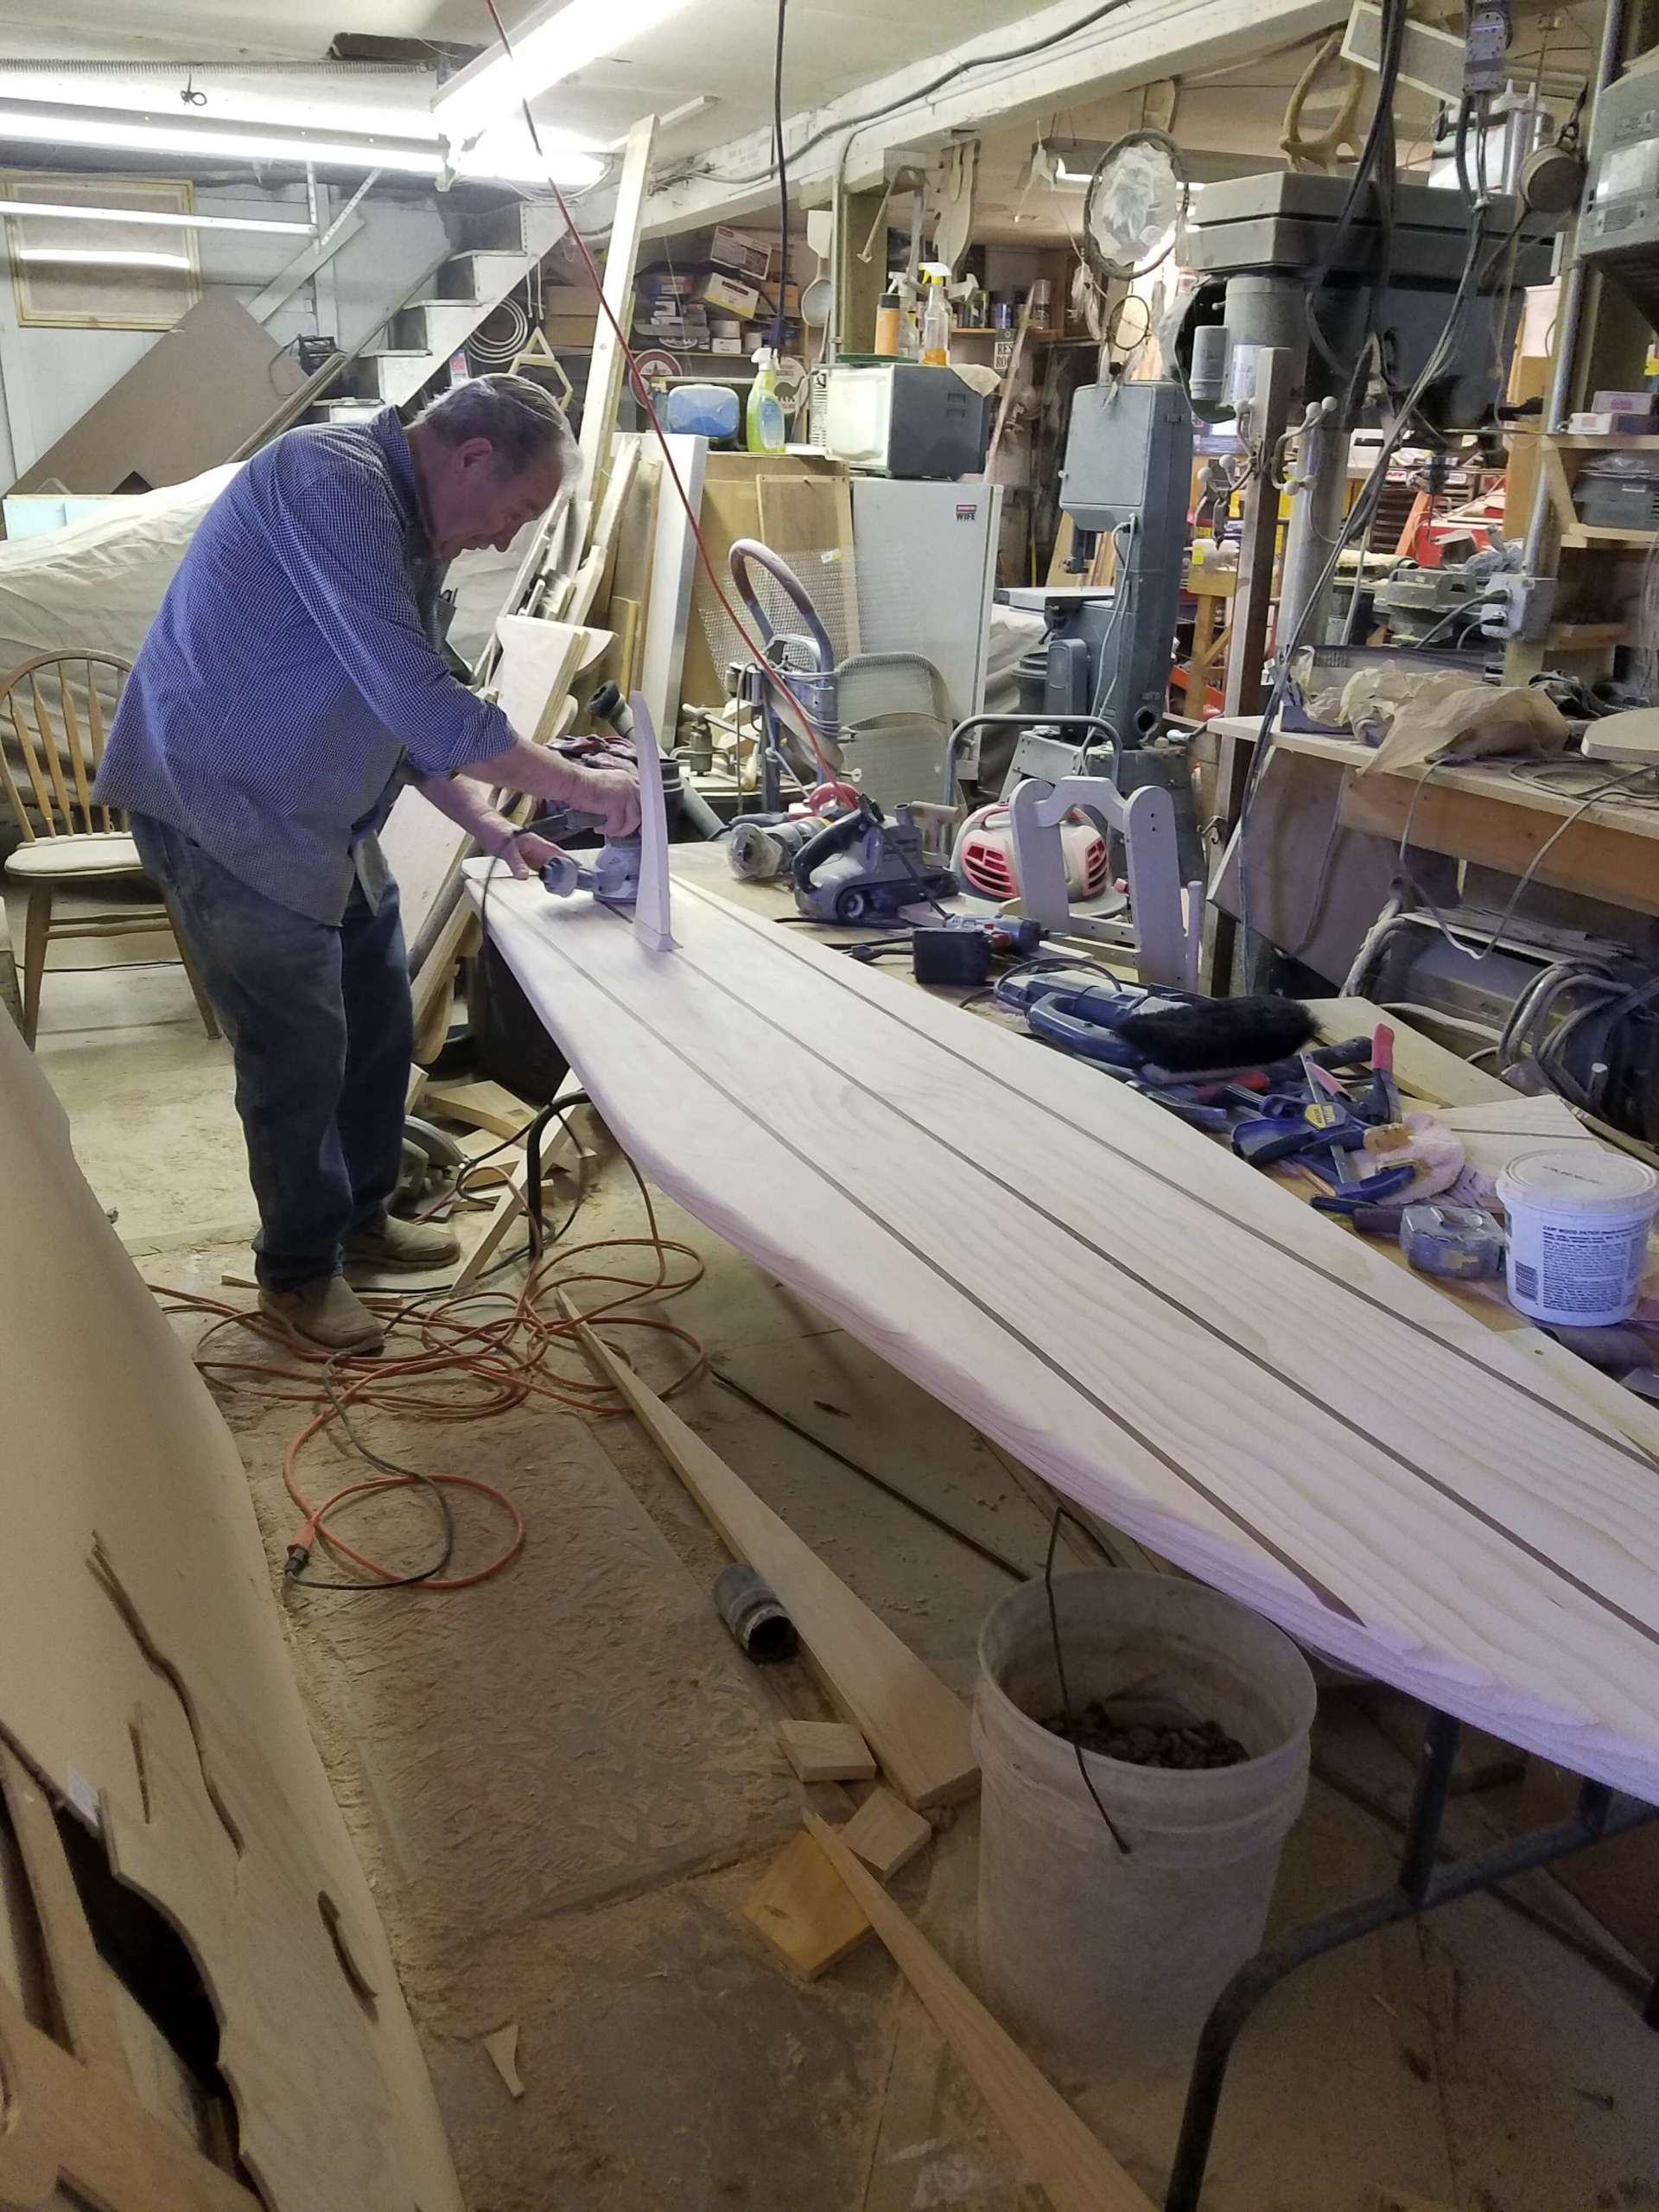 A man is working on a surfboard in a workshop